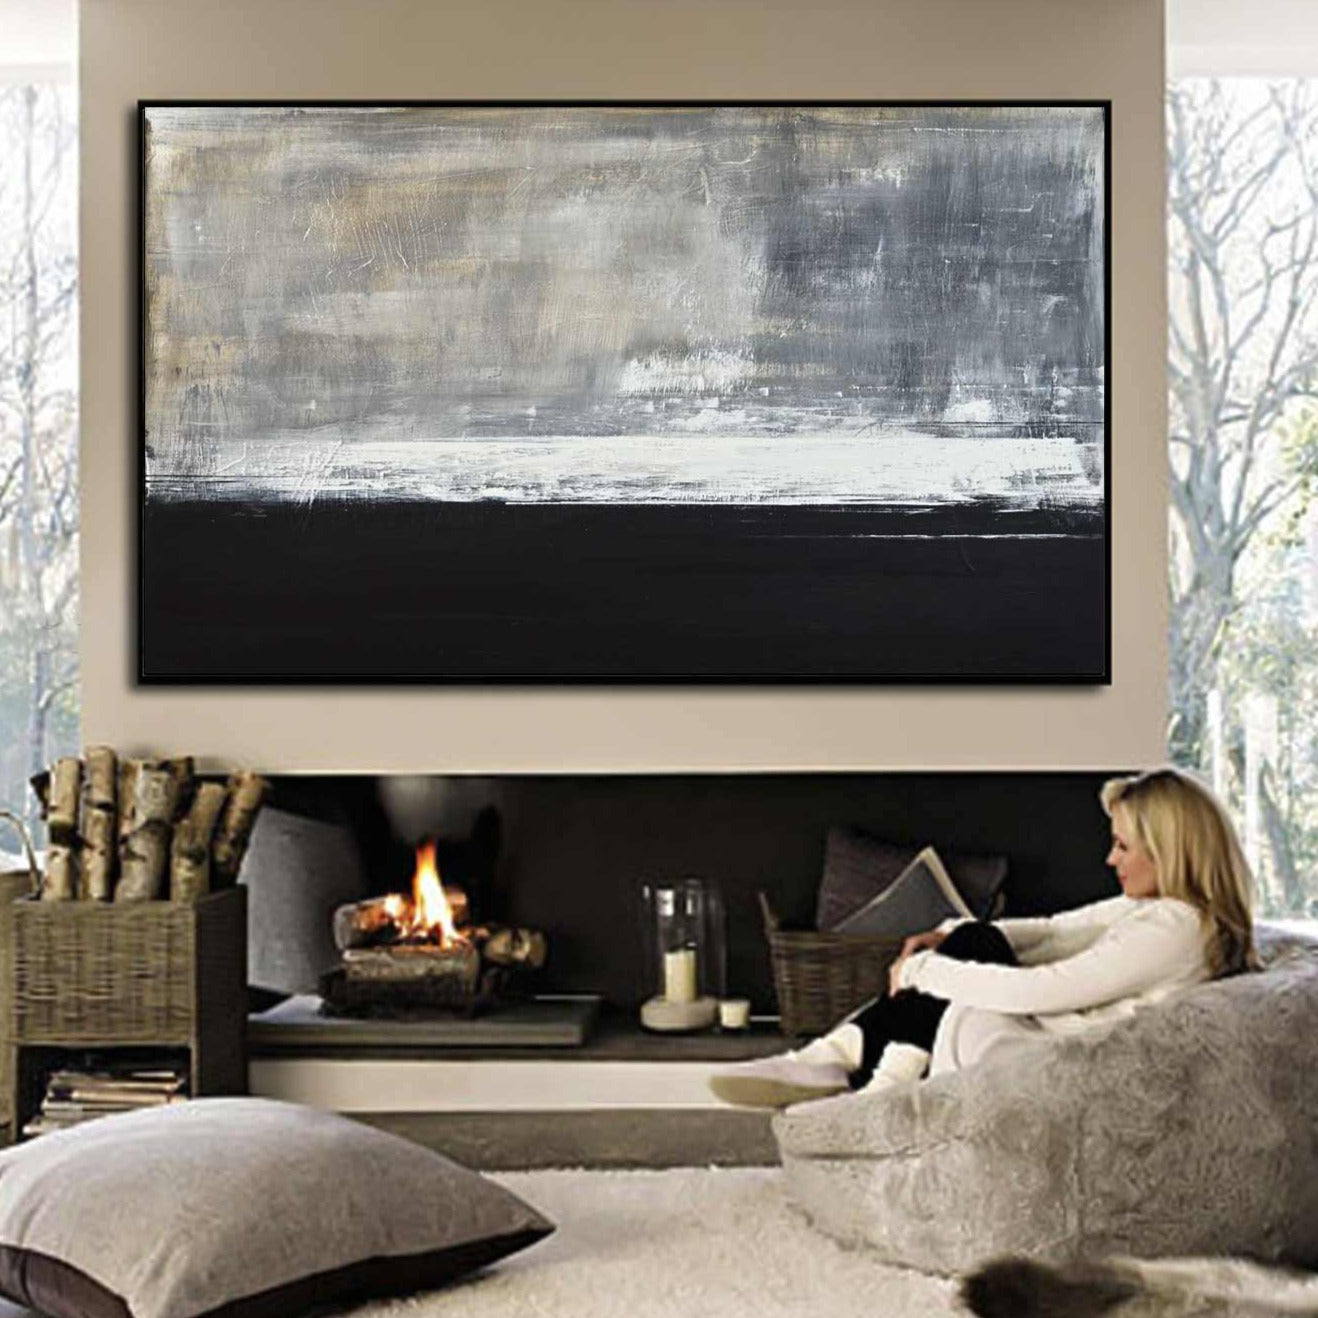 Abstract Painting Exclusive Home Decor "Spirit"